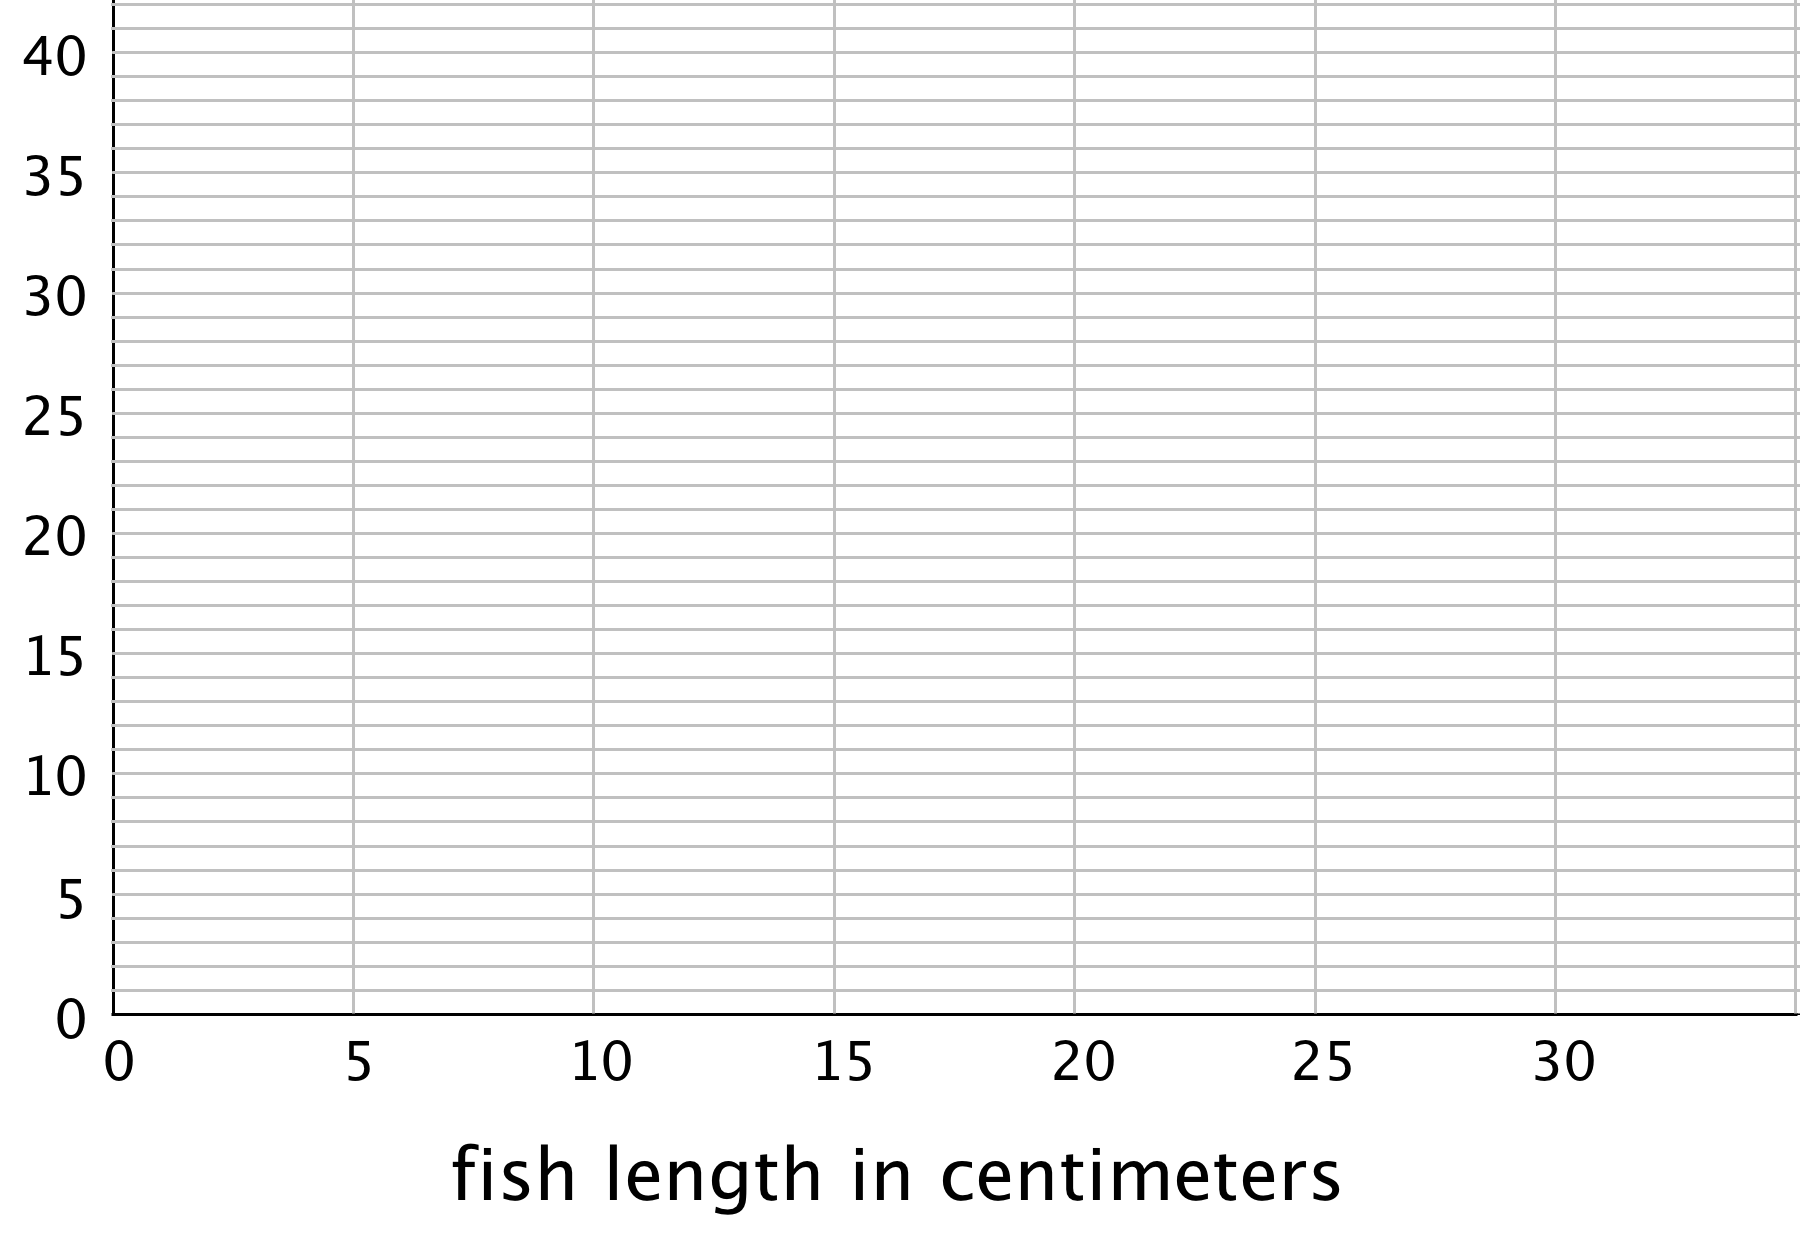 A blank grid. The horizontal axis is labeled “fish length in centimeters” and the numbers 0 through 30, in increments of 5, are indicated. The vertical axis has the numbers 0 through 40, in increments of 5, indicated. There are 4 evenly spaced horizontal gridlines between each indicated number.